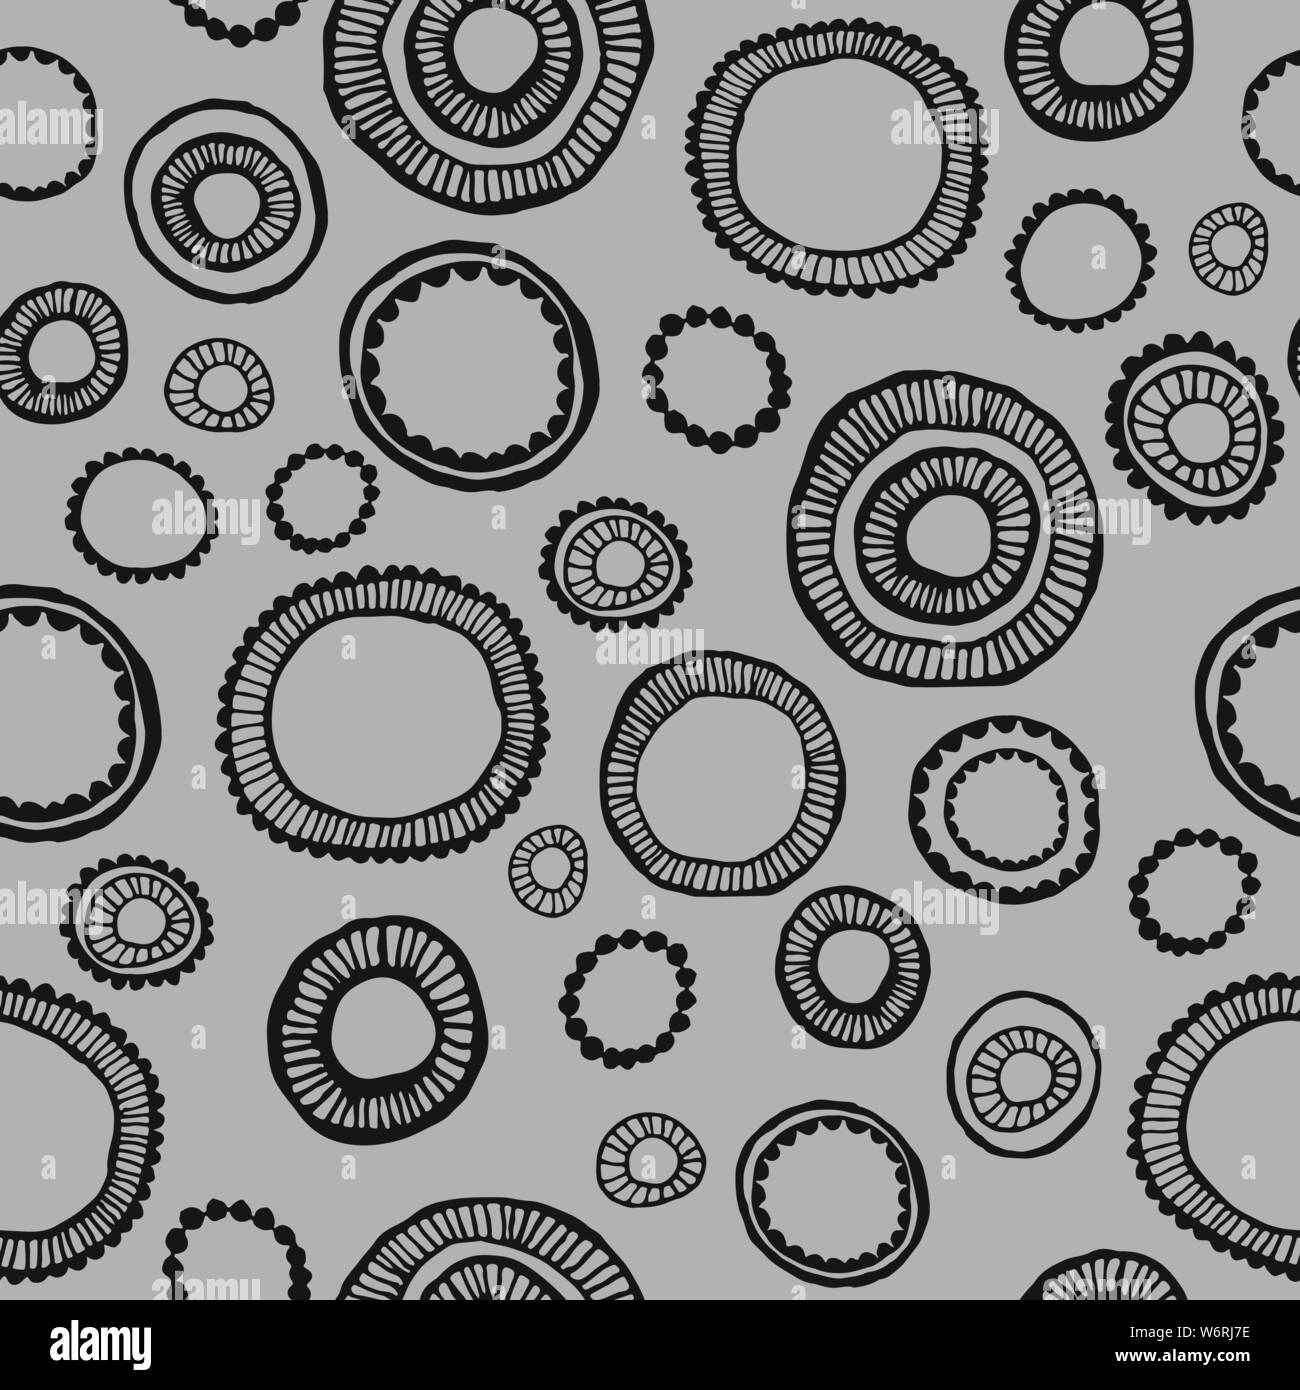 Seamless hand drawn pattern with circles. Vector illustration Stock Vector